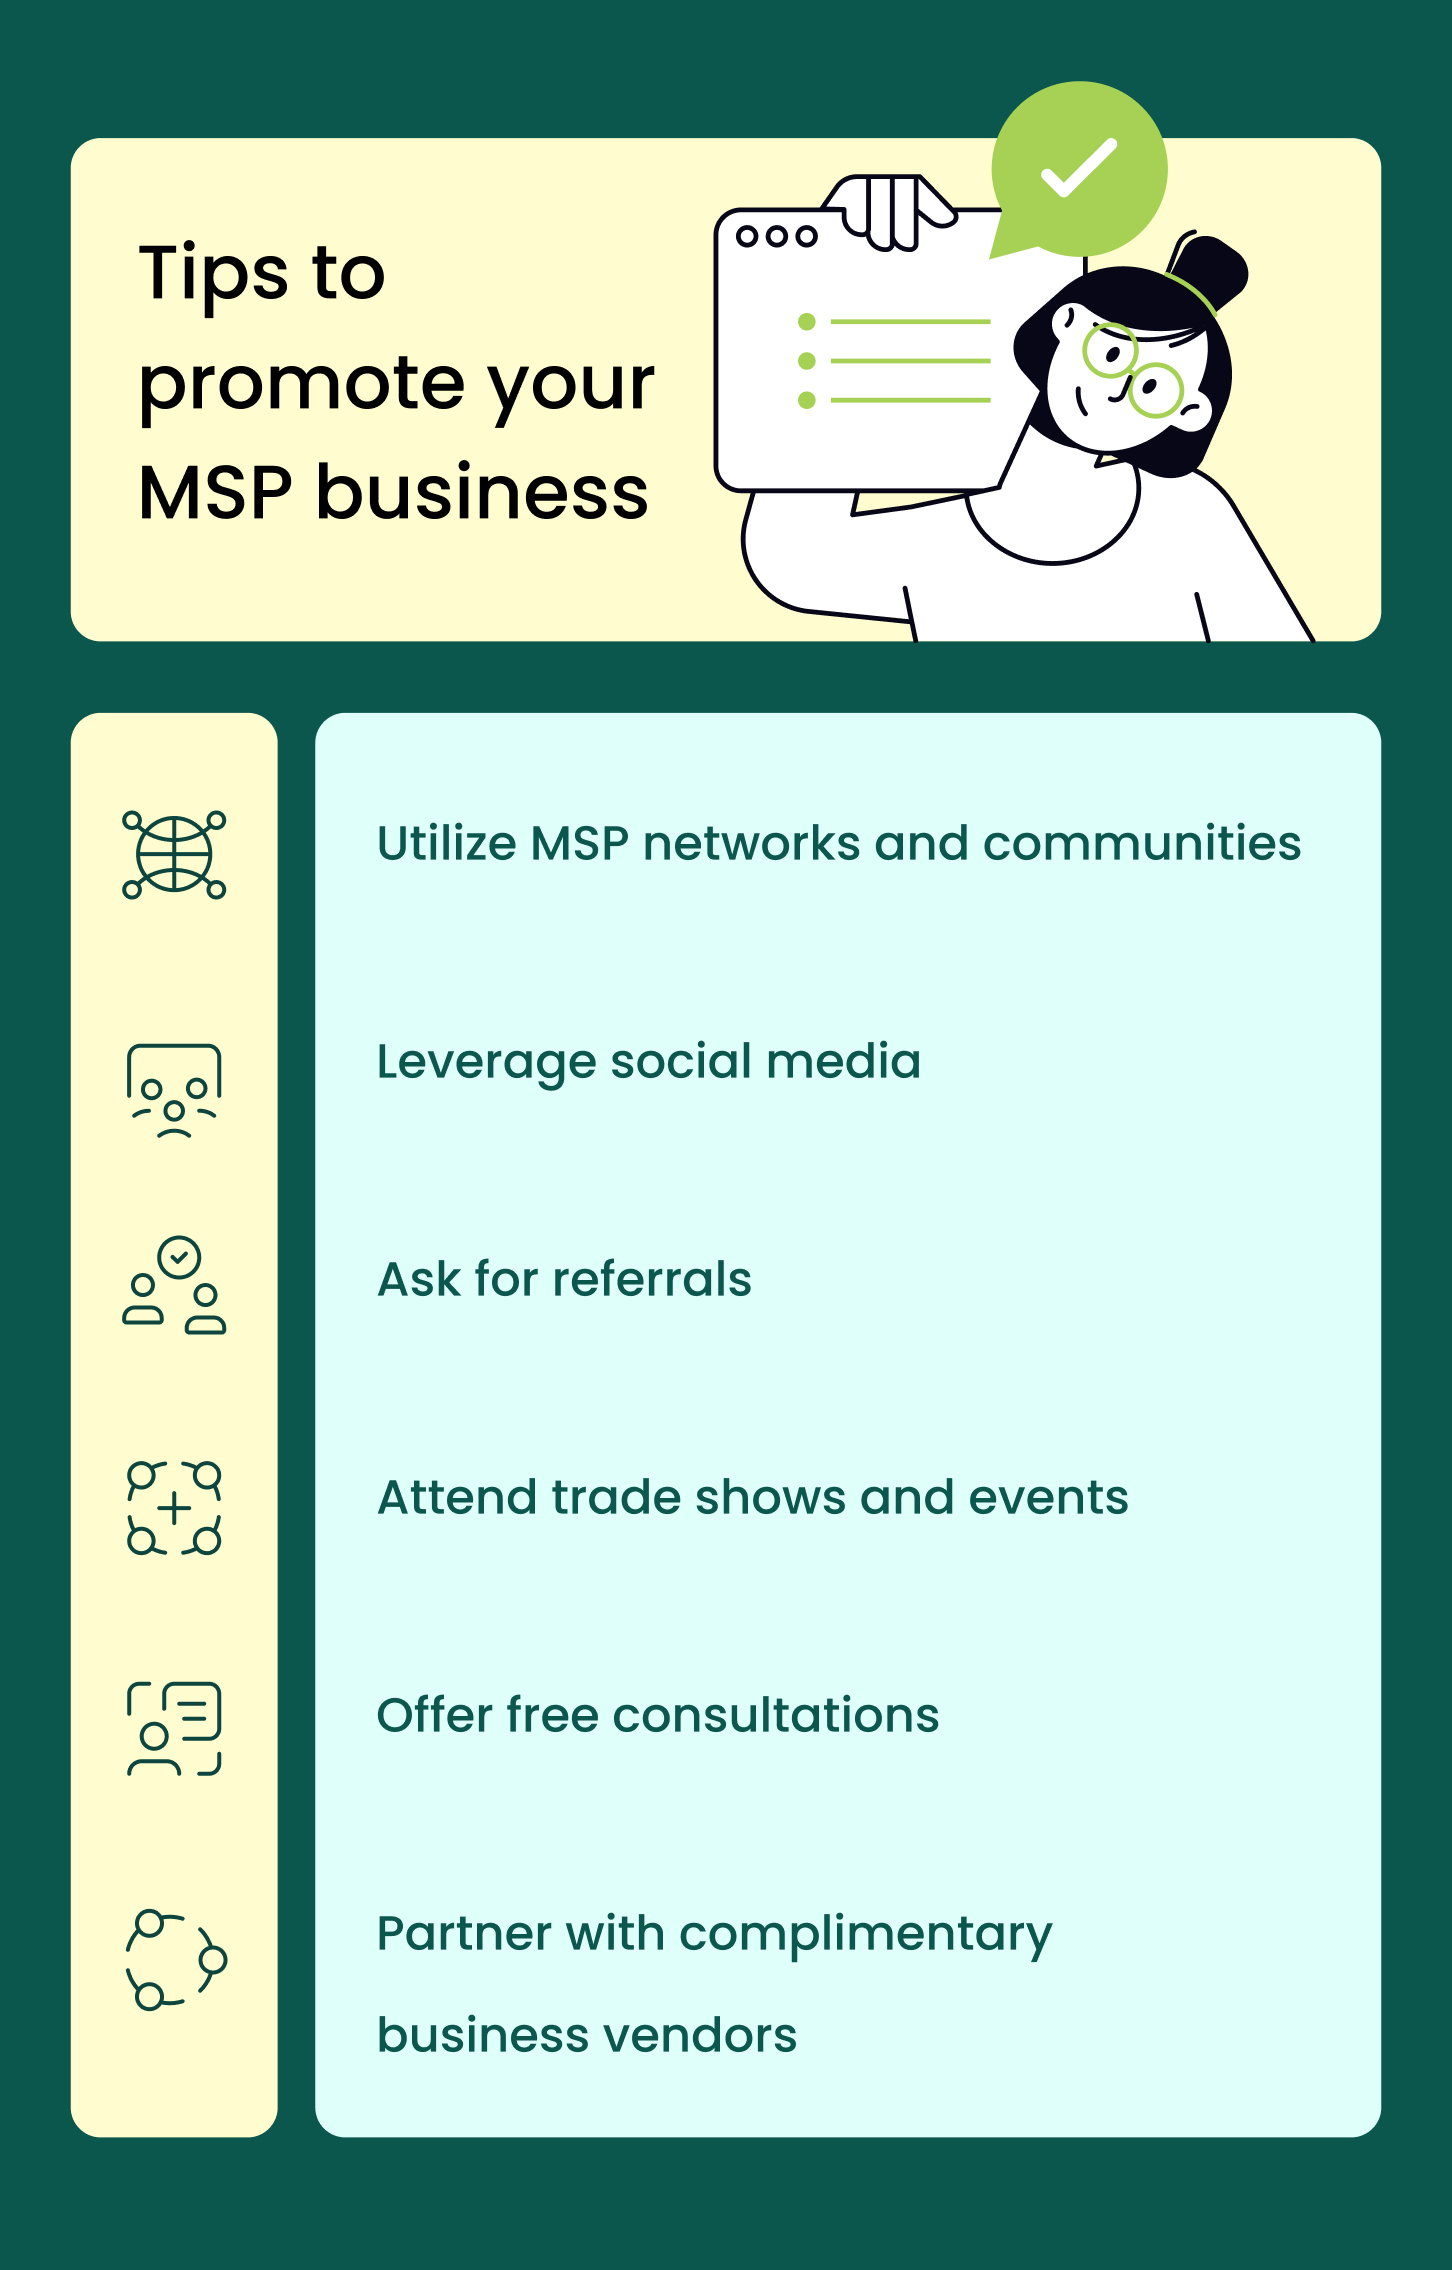 Tips to promote your MSP business.jpg